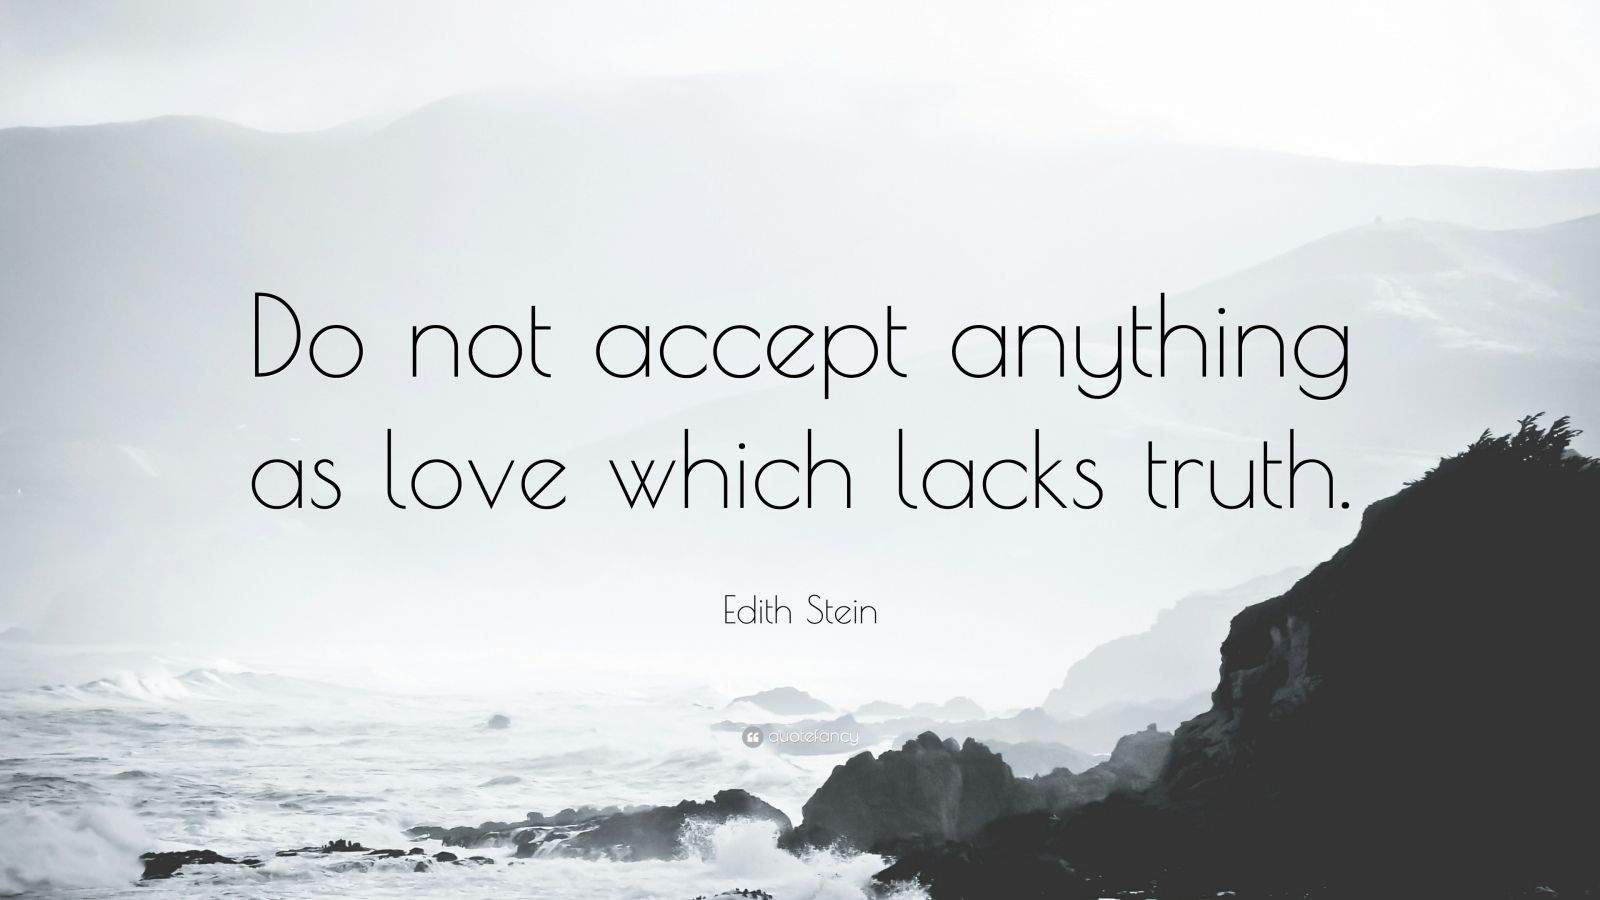 Love is not Acceptance